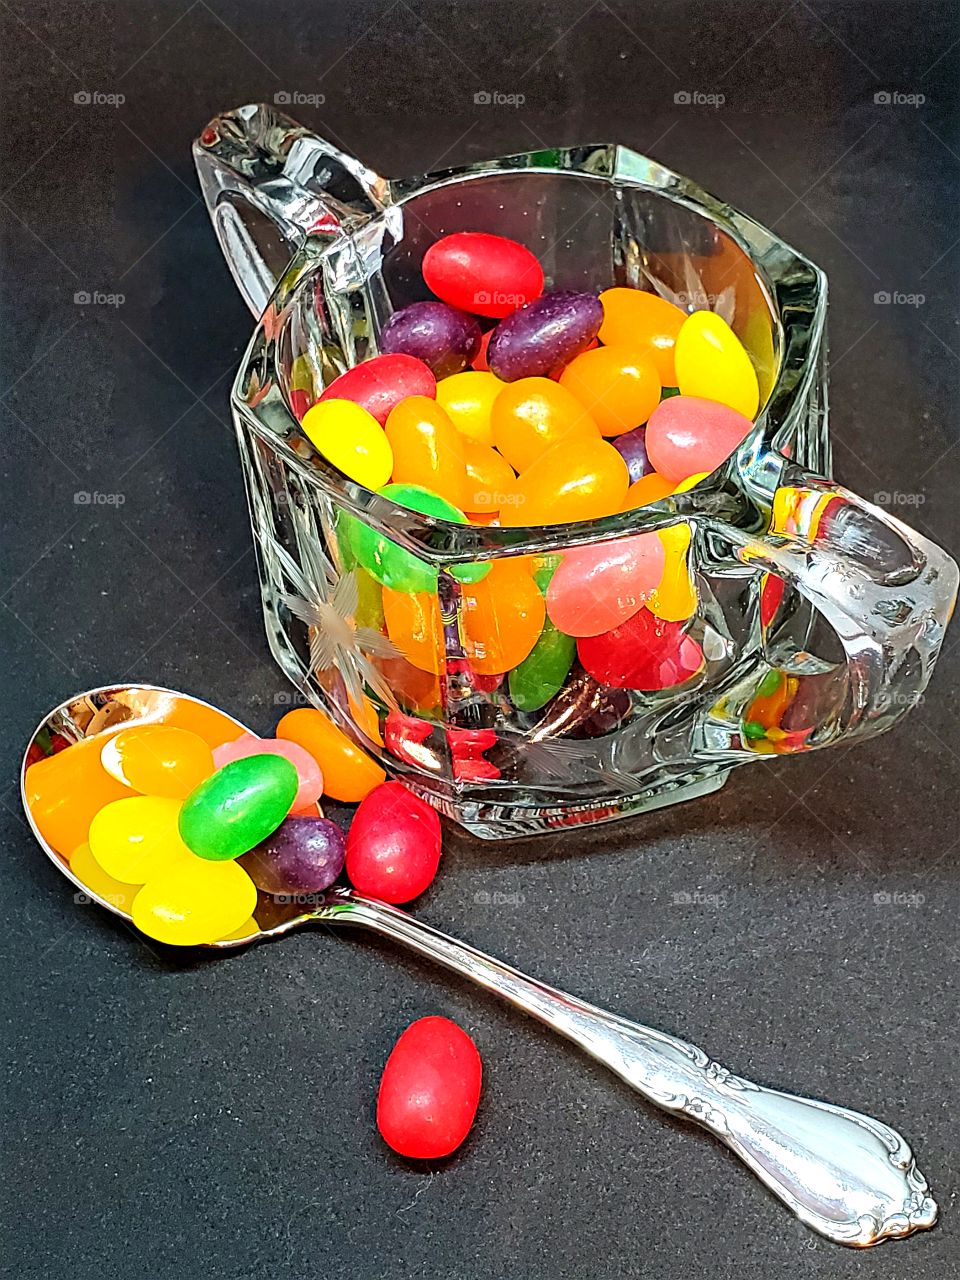 Jelly Beans in a Sugar Bowl!